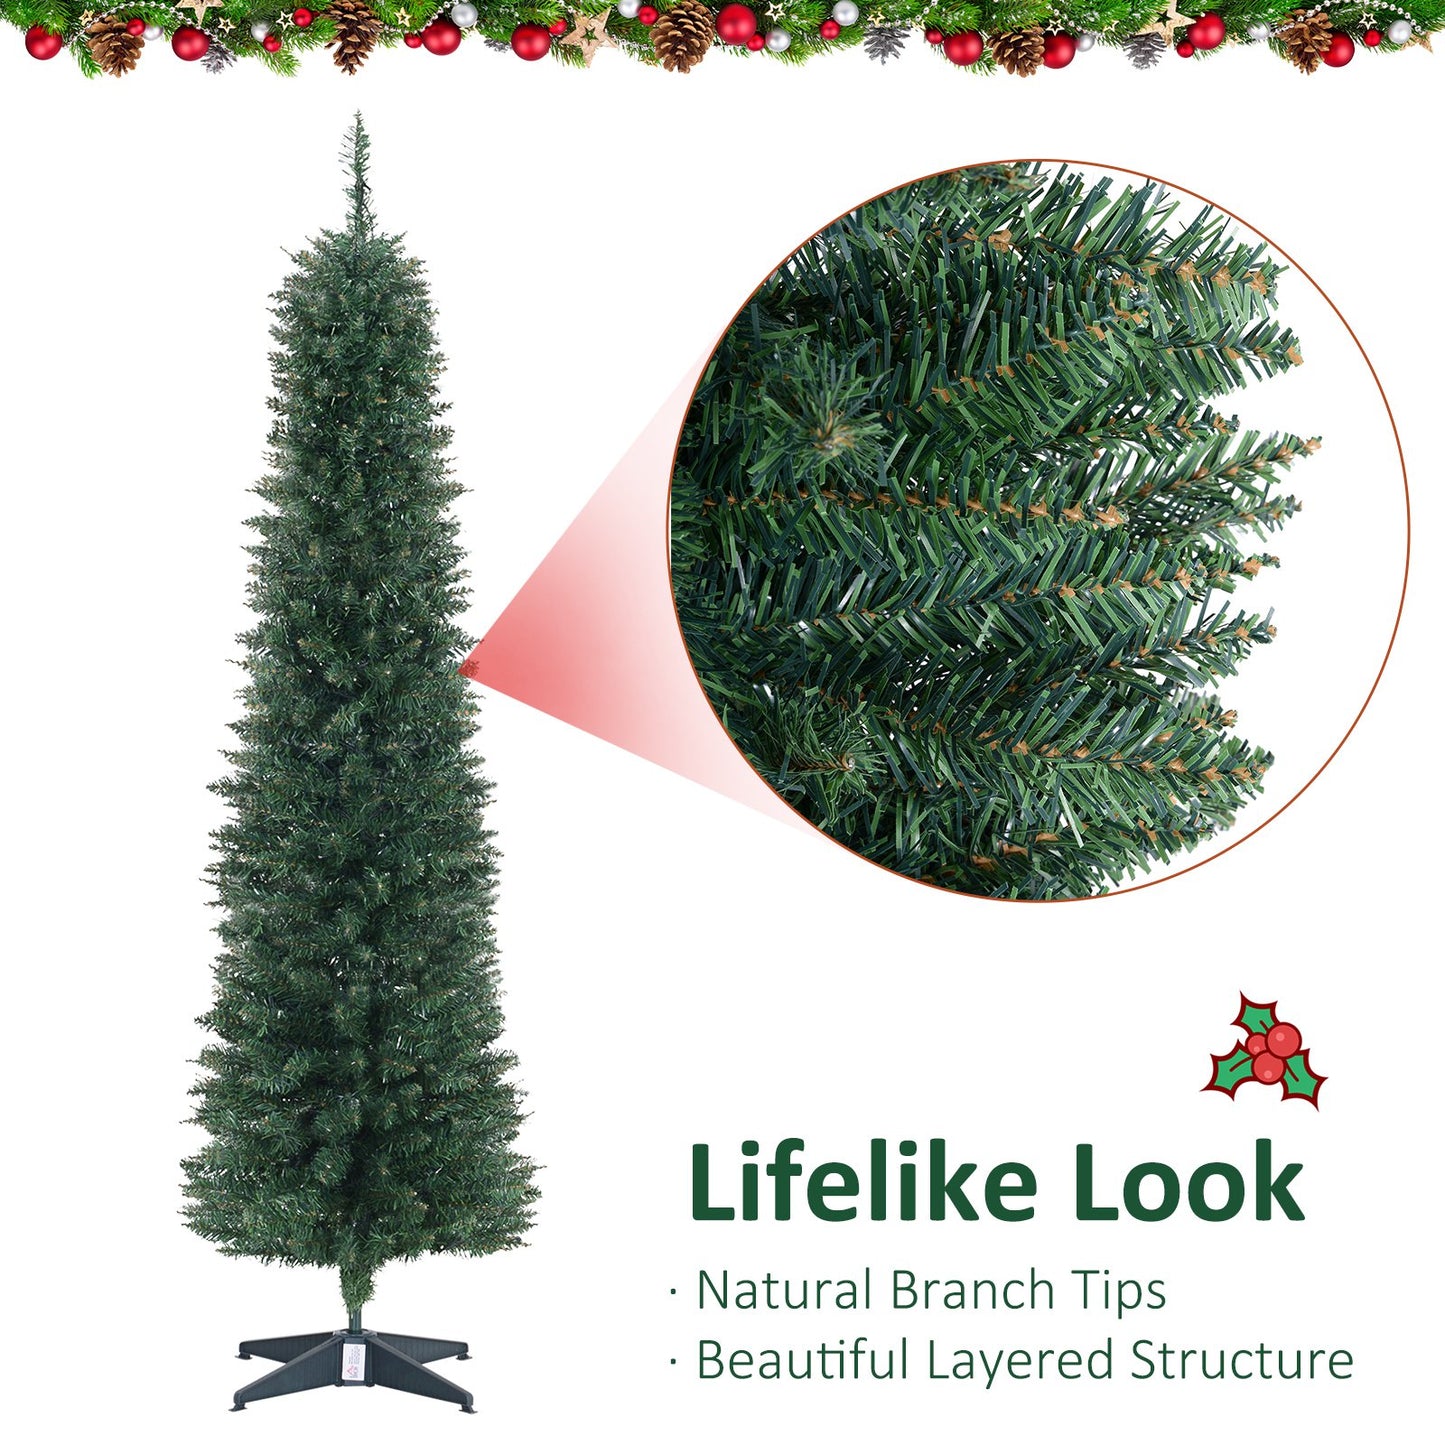 6' Pre Lit Artificial Pencil Christmas Trees, Xmas Tree with Realistic Branches and Warm White LED Lights, Green - Gallery Canada